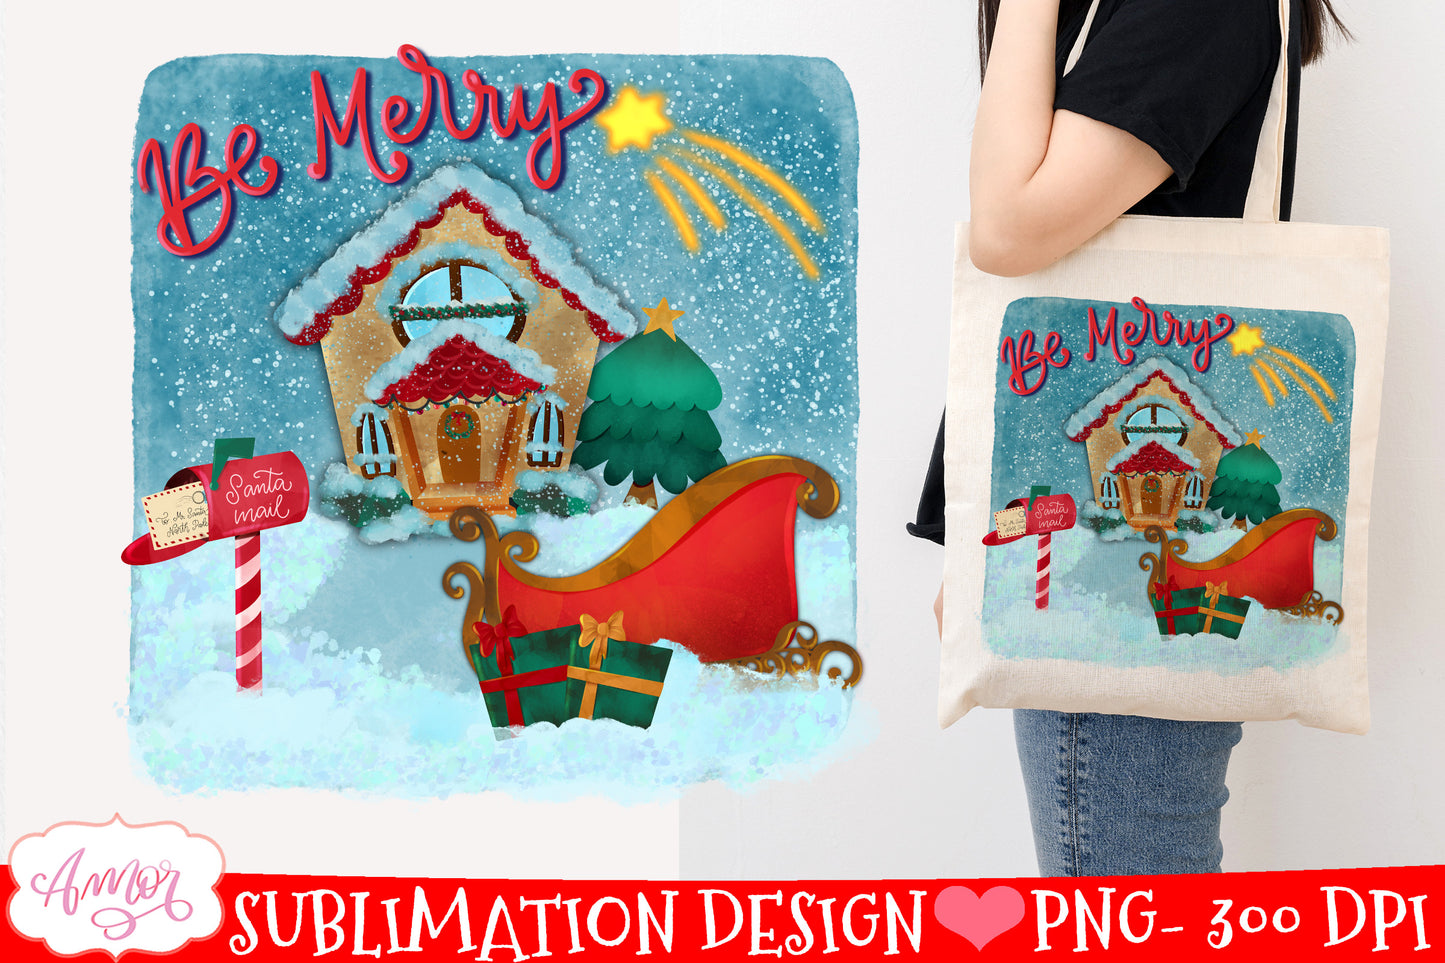 Be Merry Sublimation Design  Christmas winter scene PNG